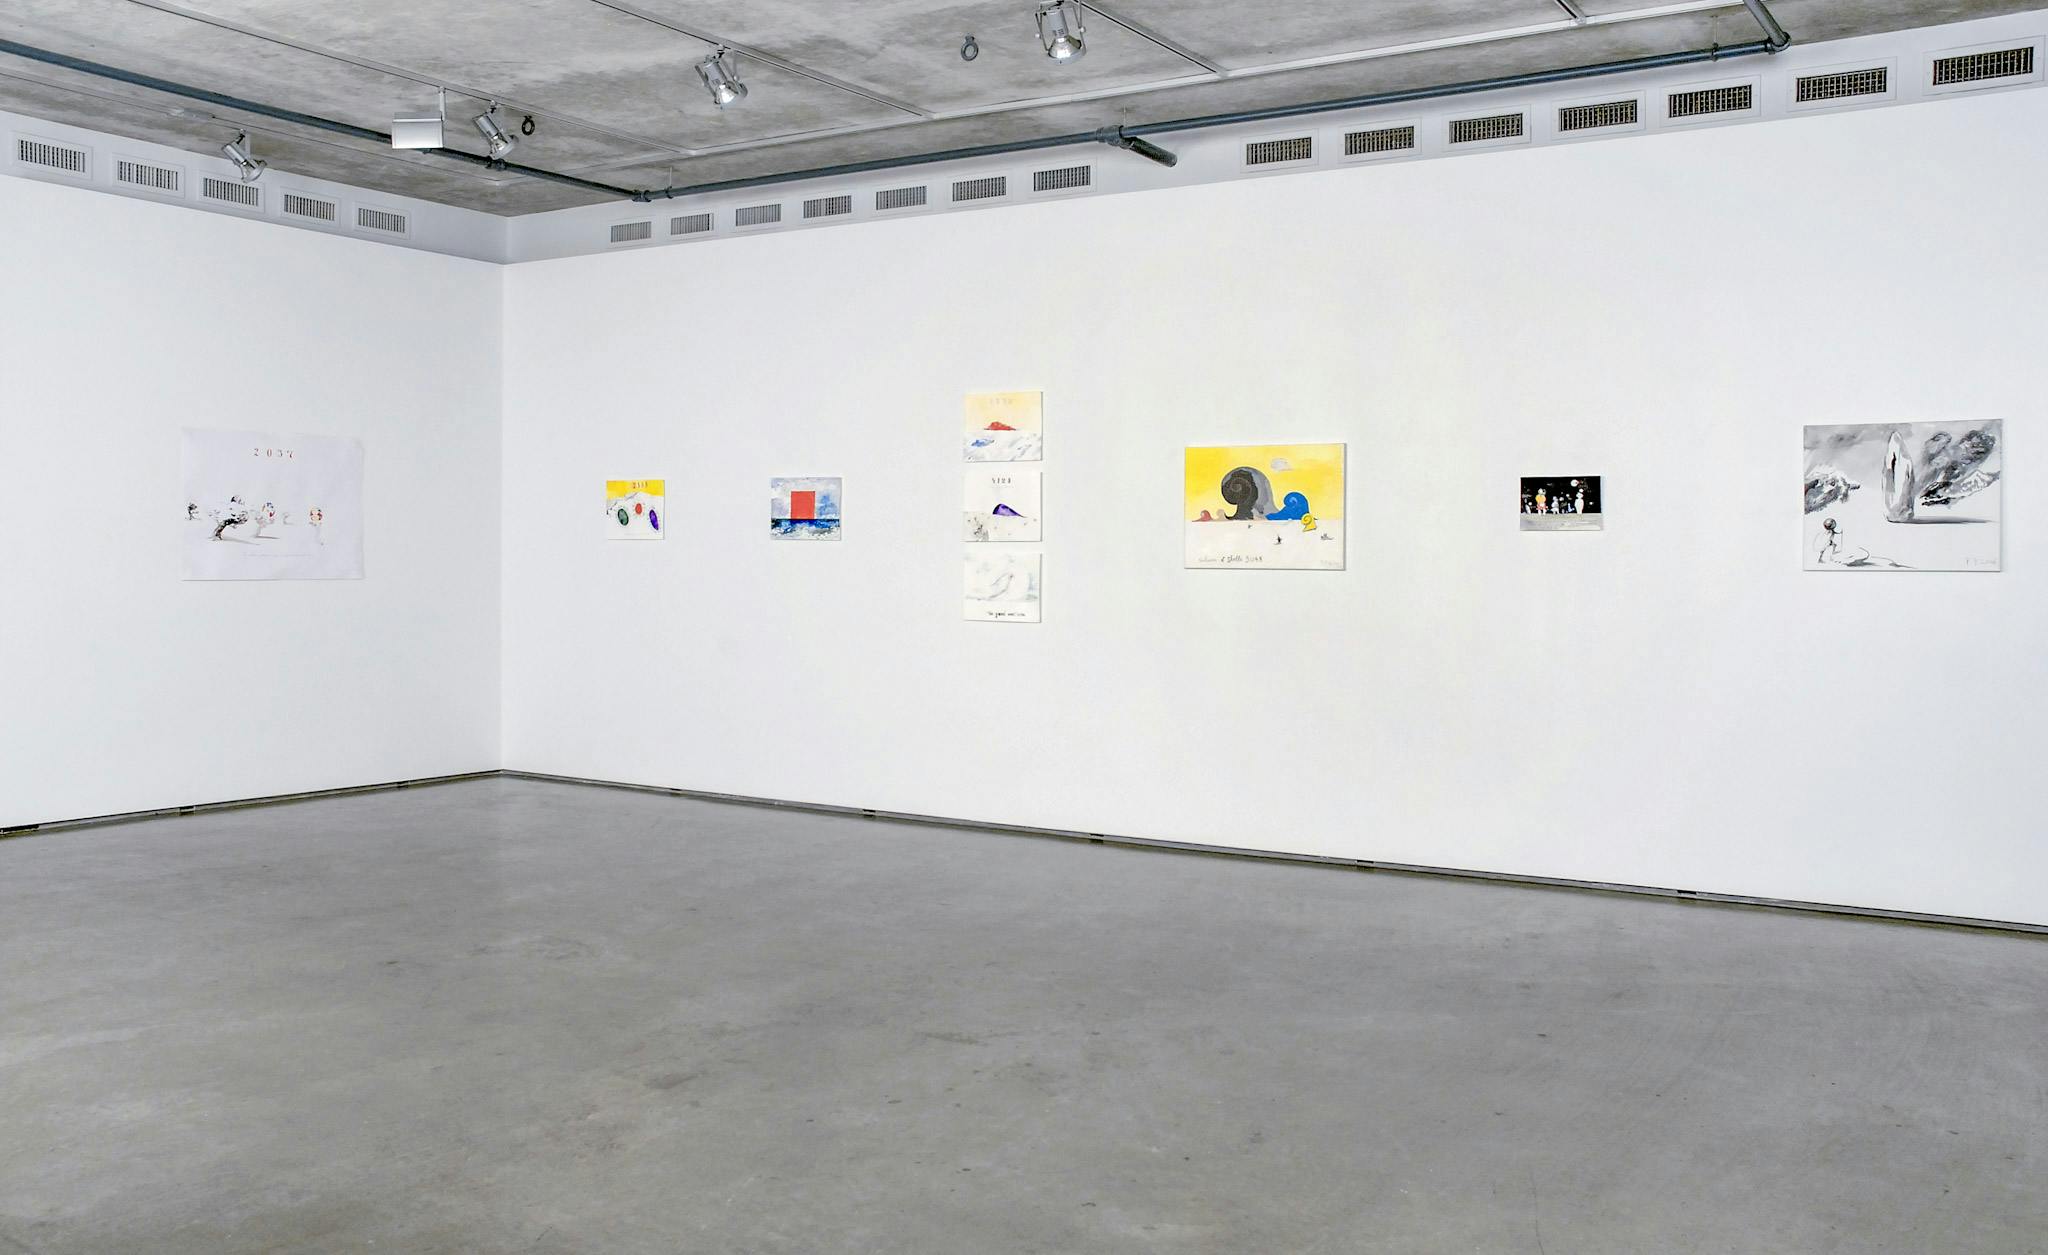 Nine unframed coloured drawings are mounted on the gallery walls. Eight of them are coloured. All of the pieces depict some creatures including humans and bacterias. 